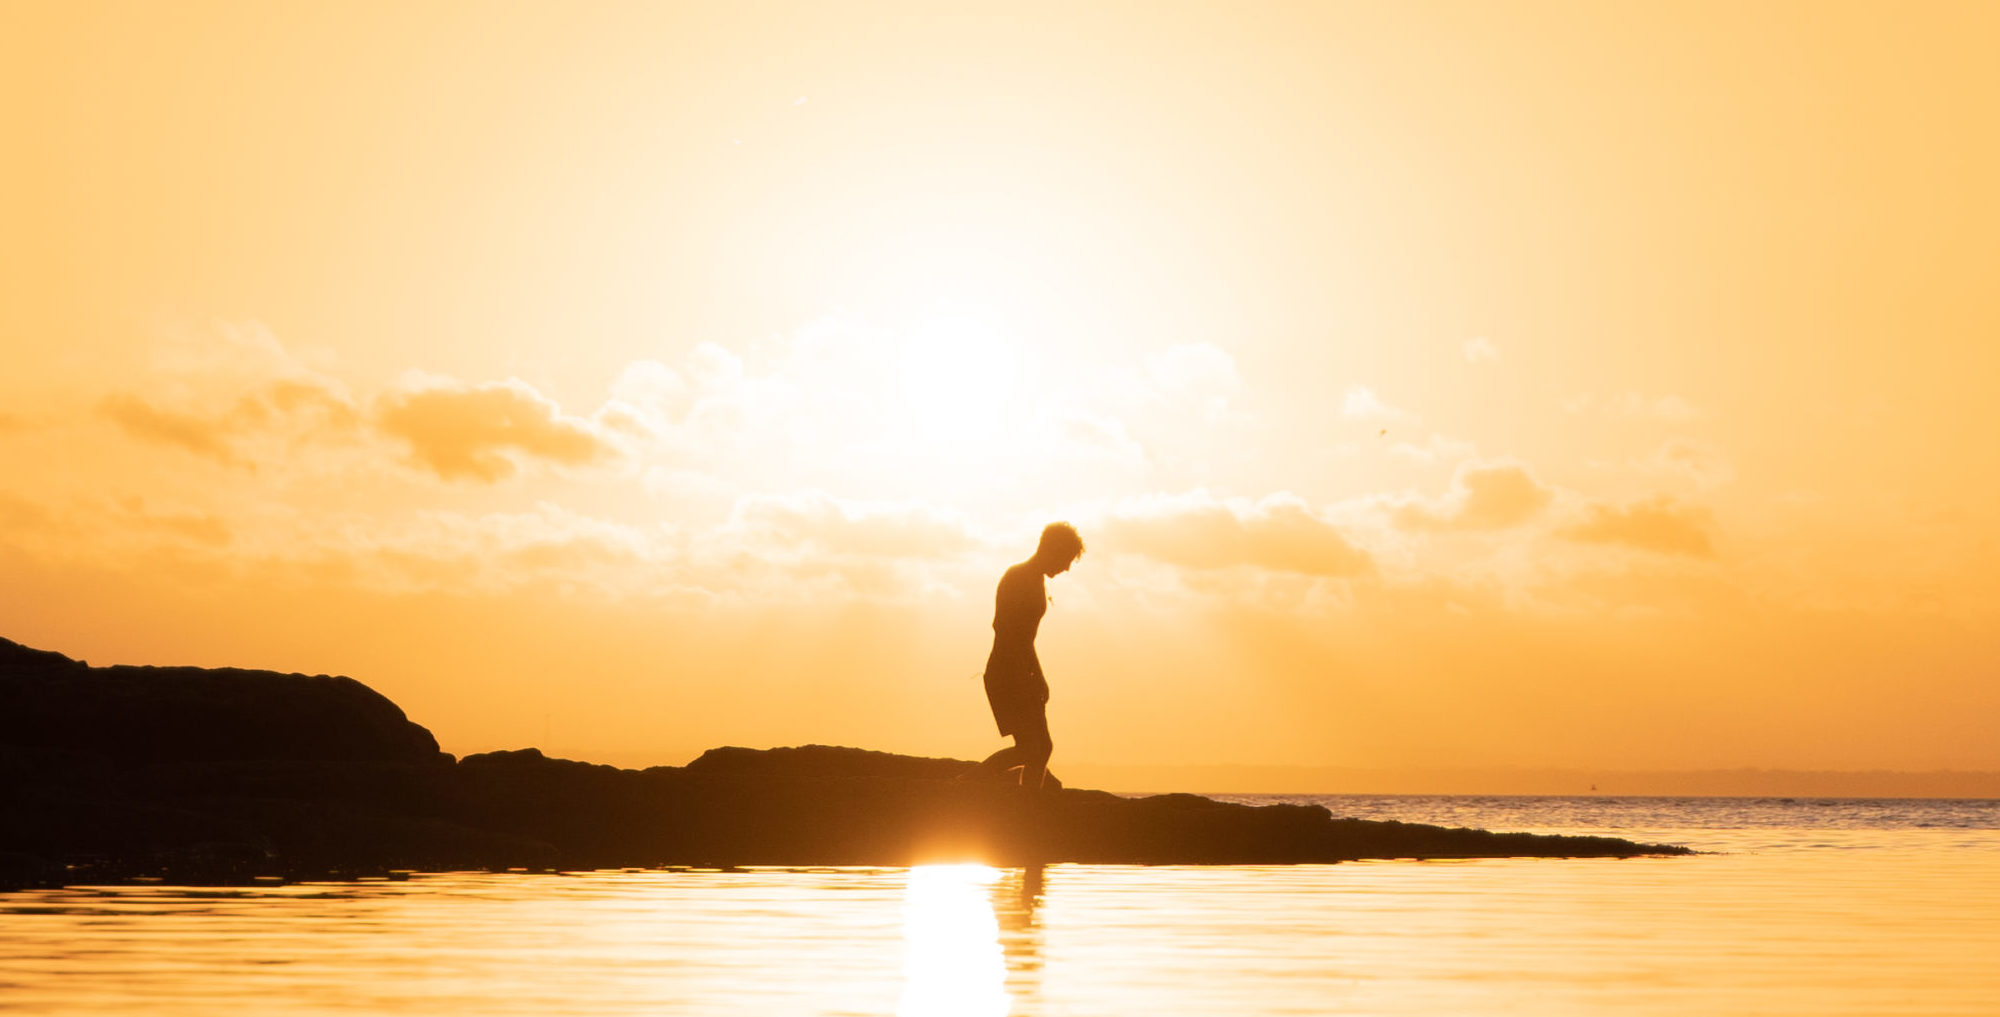 Silhouette of man standing on seashore during sunset